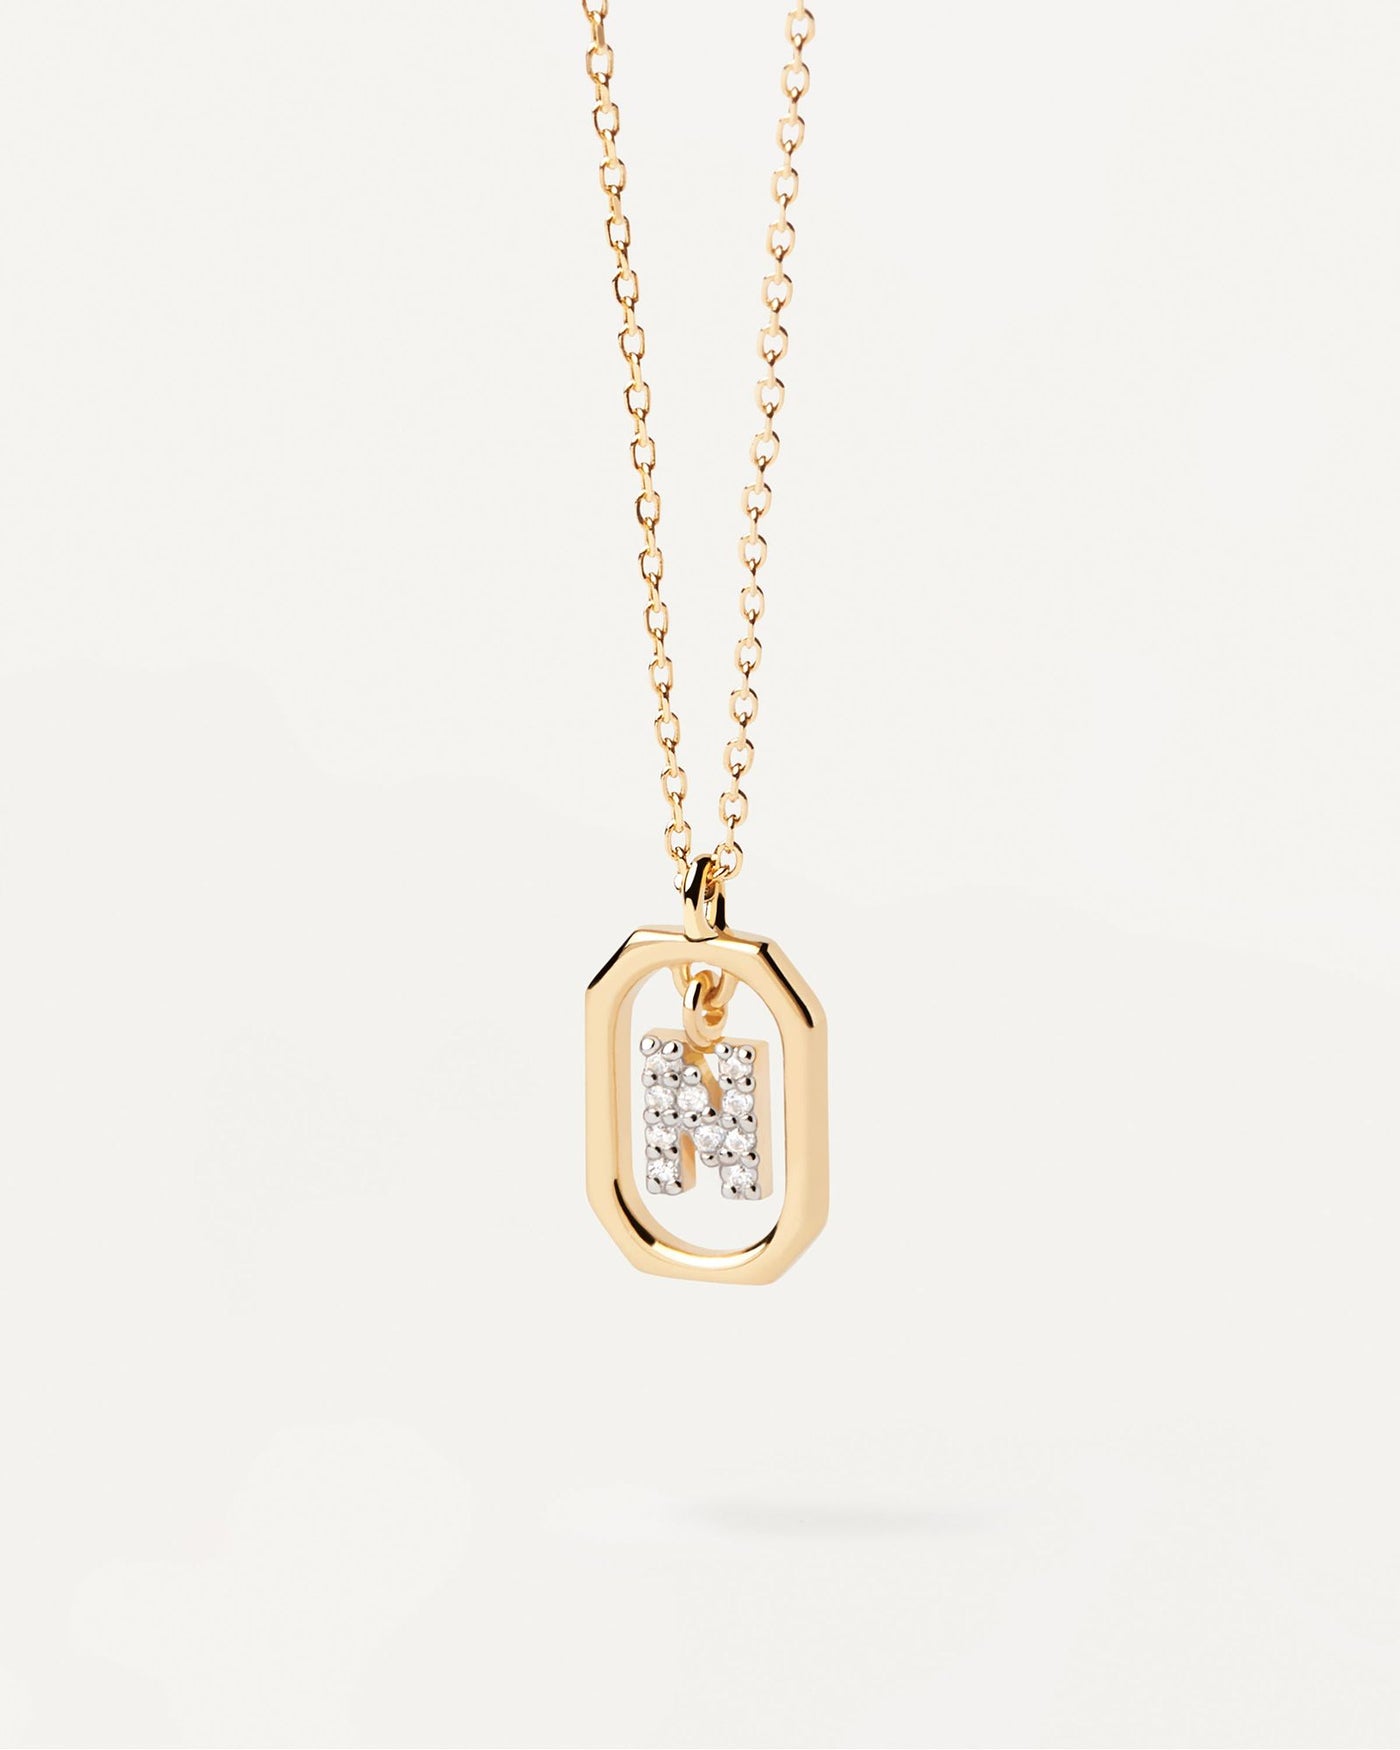 2024 Selection | Mini Letter N Necklace. Small initial N necklace in zirconia inside gold-plated silver octagonal pendant. Get the latest arrival from PDPAOLA. Place your order safely and get this Best Seller. Free Shipping.